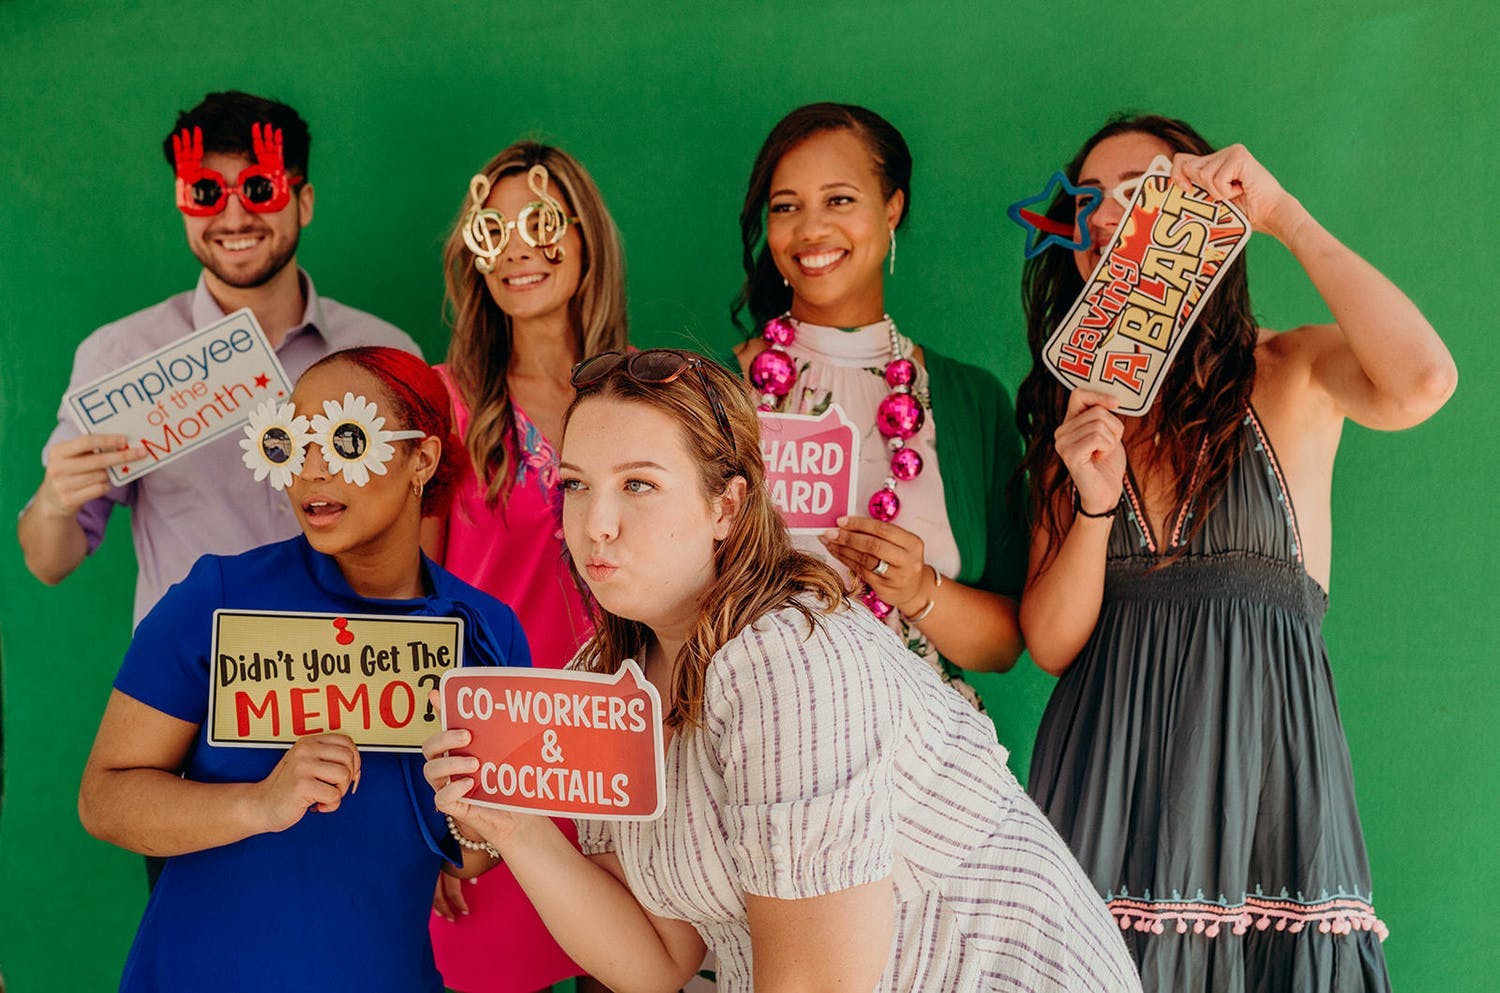 Guests pose against green backdrop at corporate event with fun photo props | PartySlate